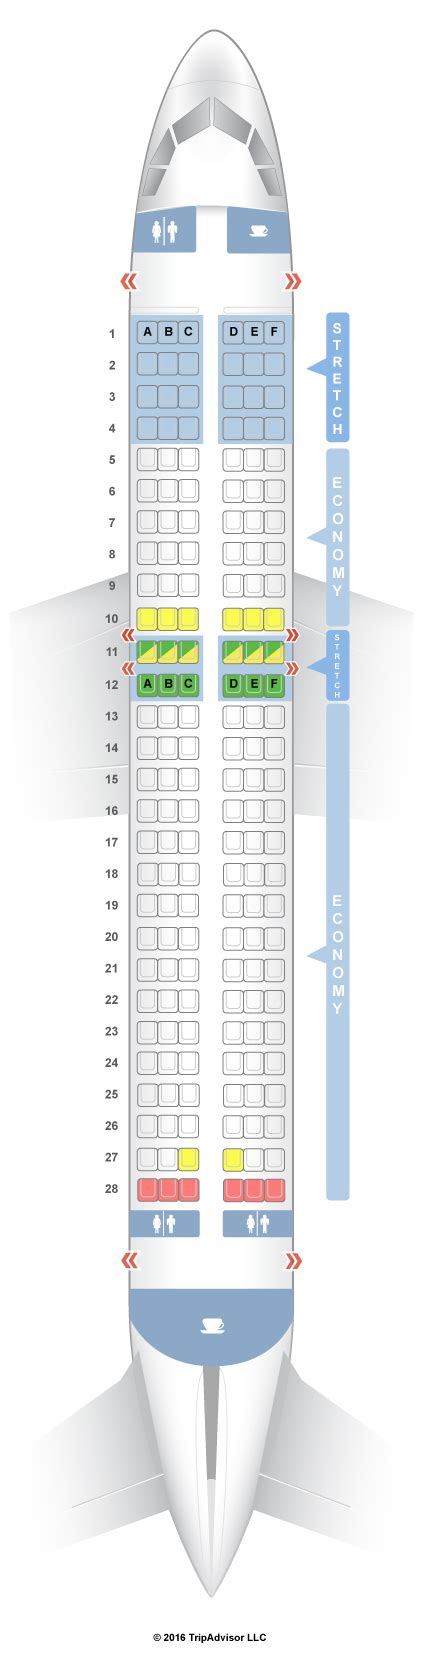 Our seat widths vary depending on the size of the aircraft. Minimum seat widths on the A319 and A320 are 17.4" and on our A321 minimum seat widths are 16.5". Car seats cannot be placed in emergency exit rows, in the rows directly in front of or behind emergency exit rows, or in the very first row..